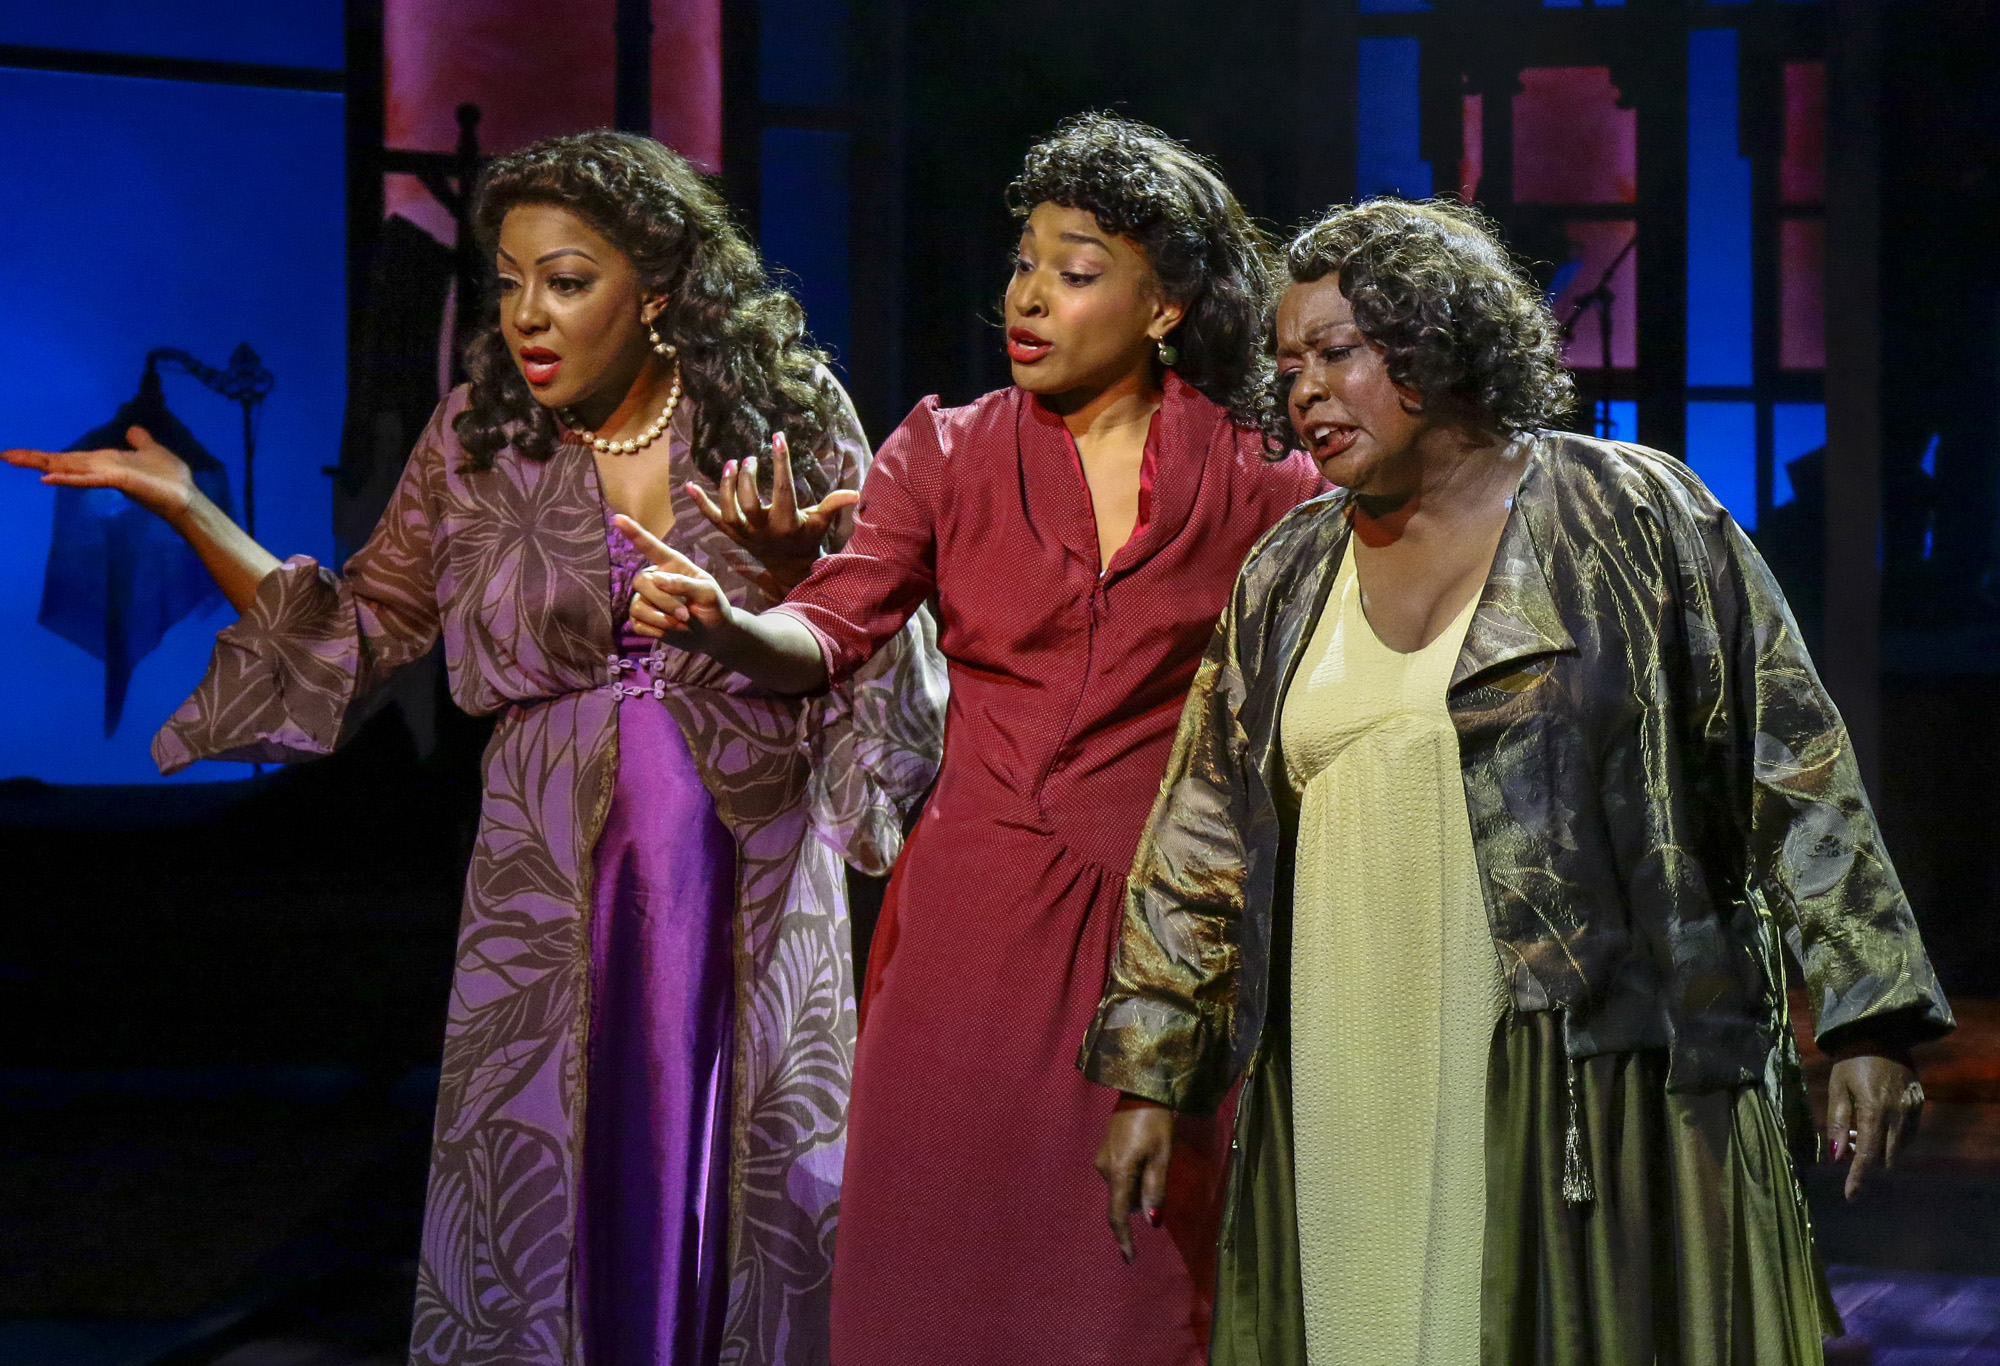 Paulette Ivory (The Woman Of The World), Bryce Charles (The Girl With A Date), Yvette Cason (The Lady From The Road). BLUES IN THE NIGHT. Photo Credit: Lawrence K. Ho.